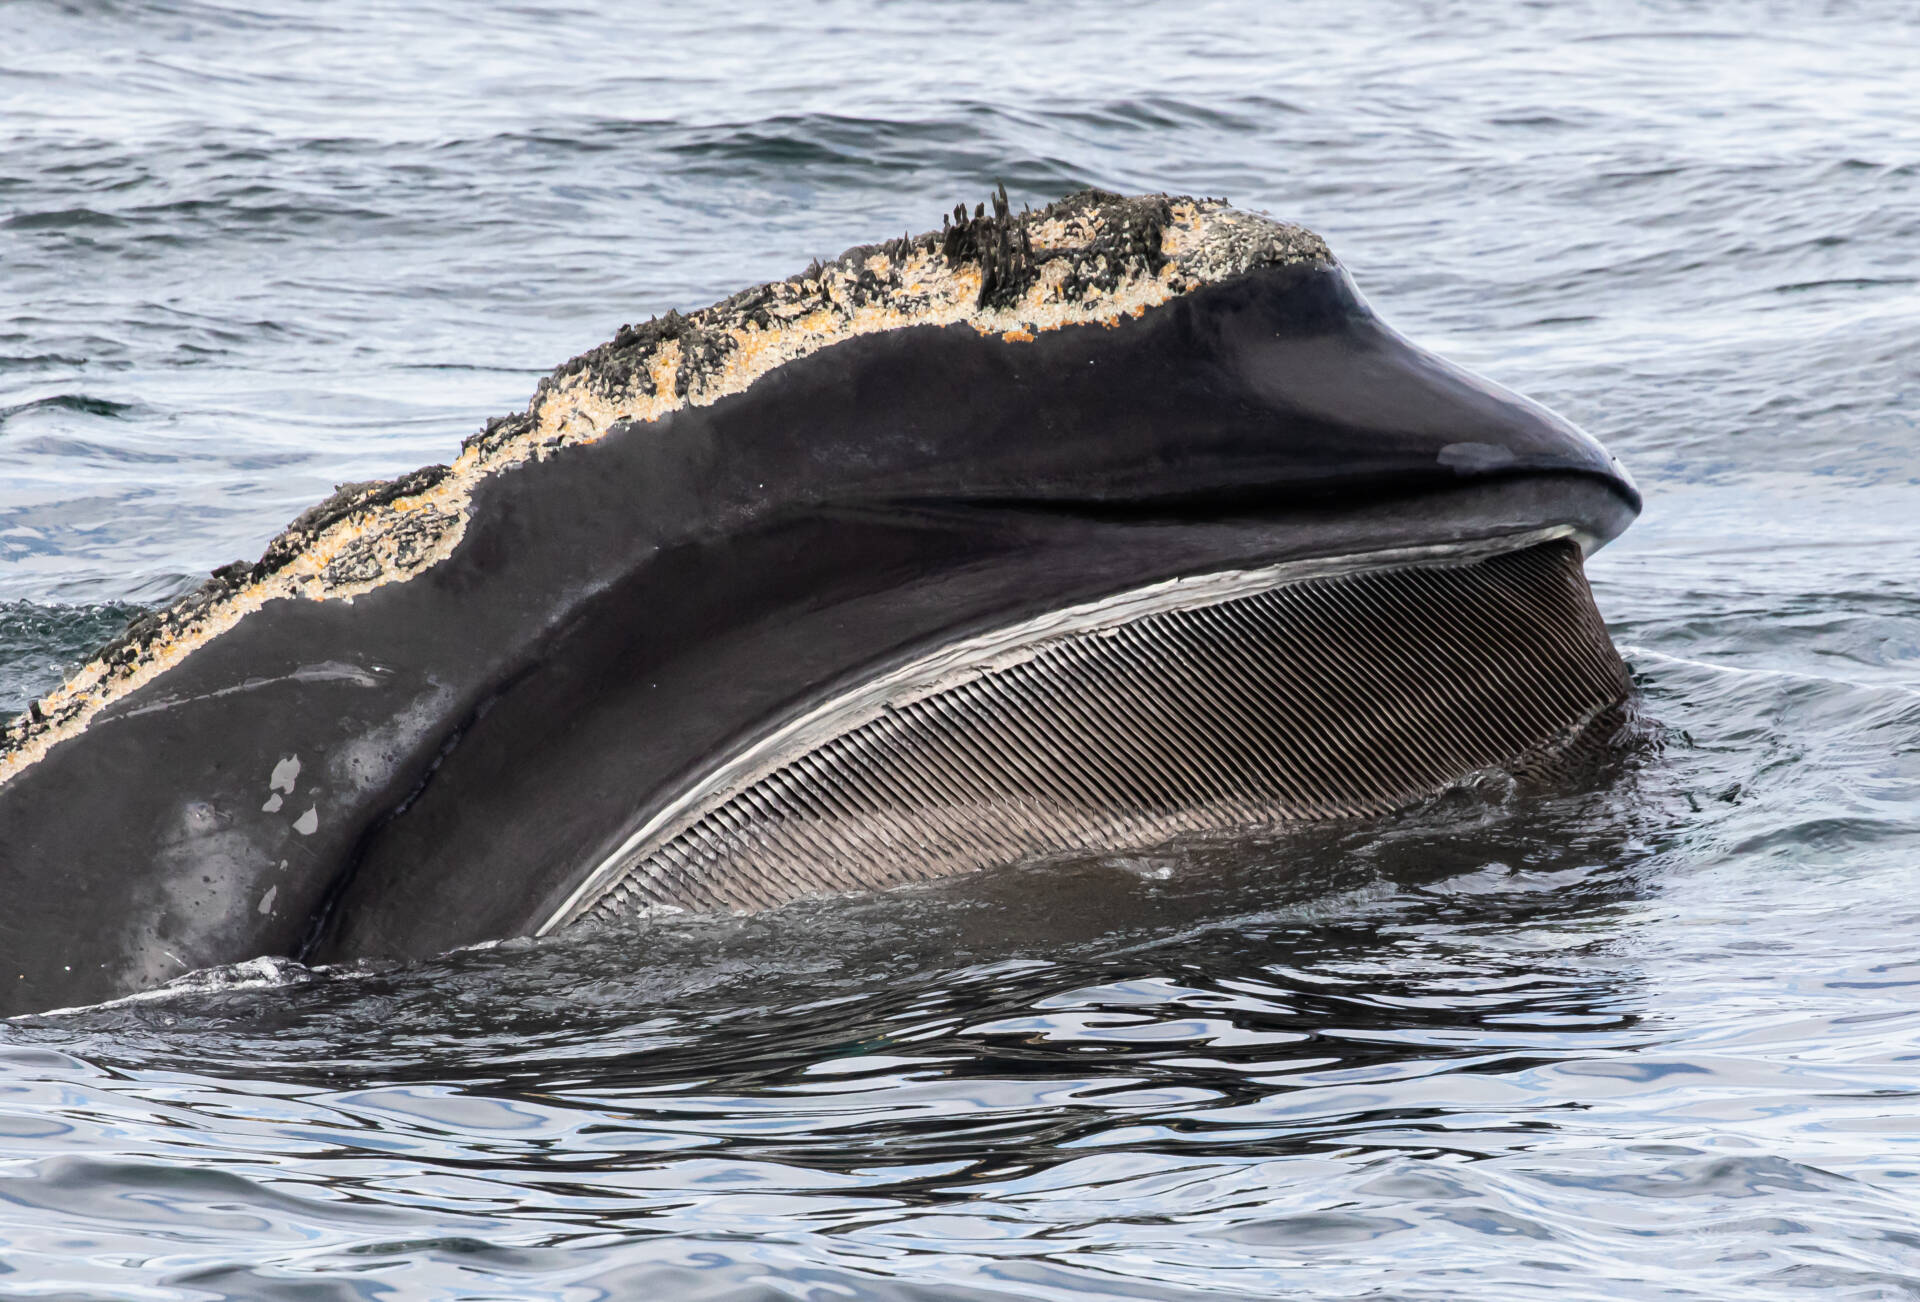 Right whale feeding in a high DMS area. (Photo taken under Permit No. 21371-01 to NMFS Northeast Fisheries Science Center. Credit: Peter Trull)